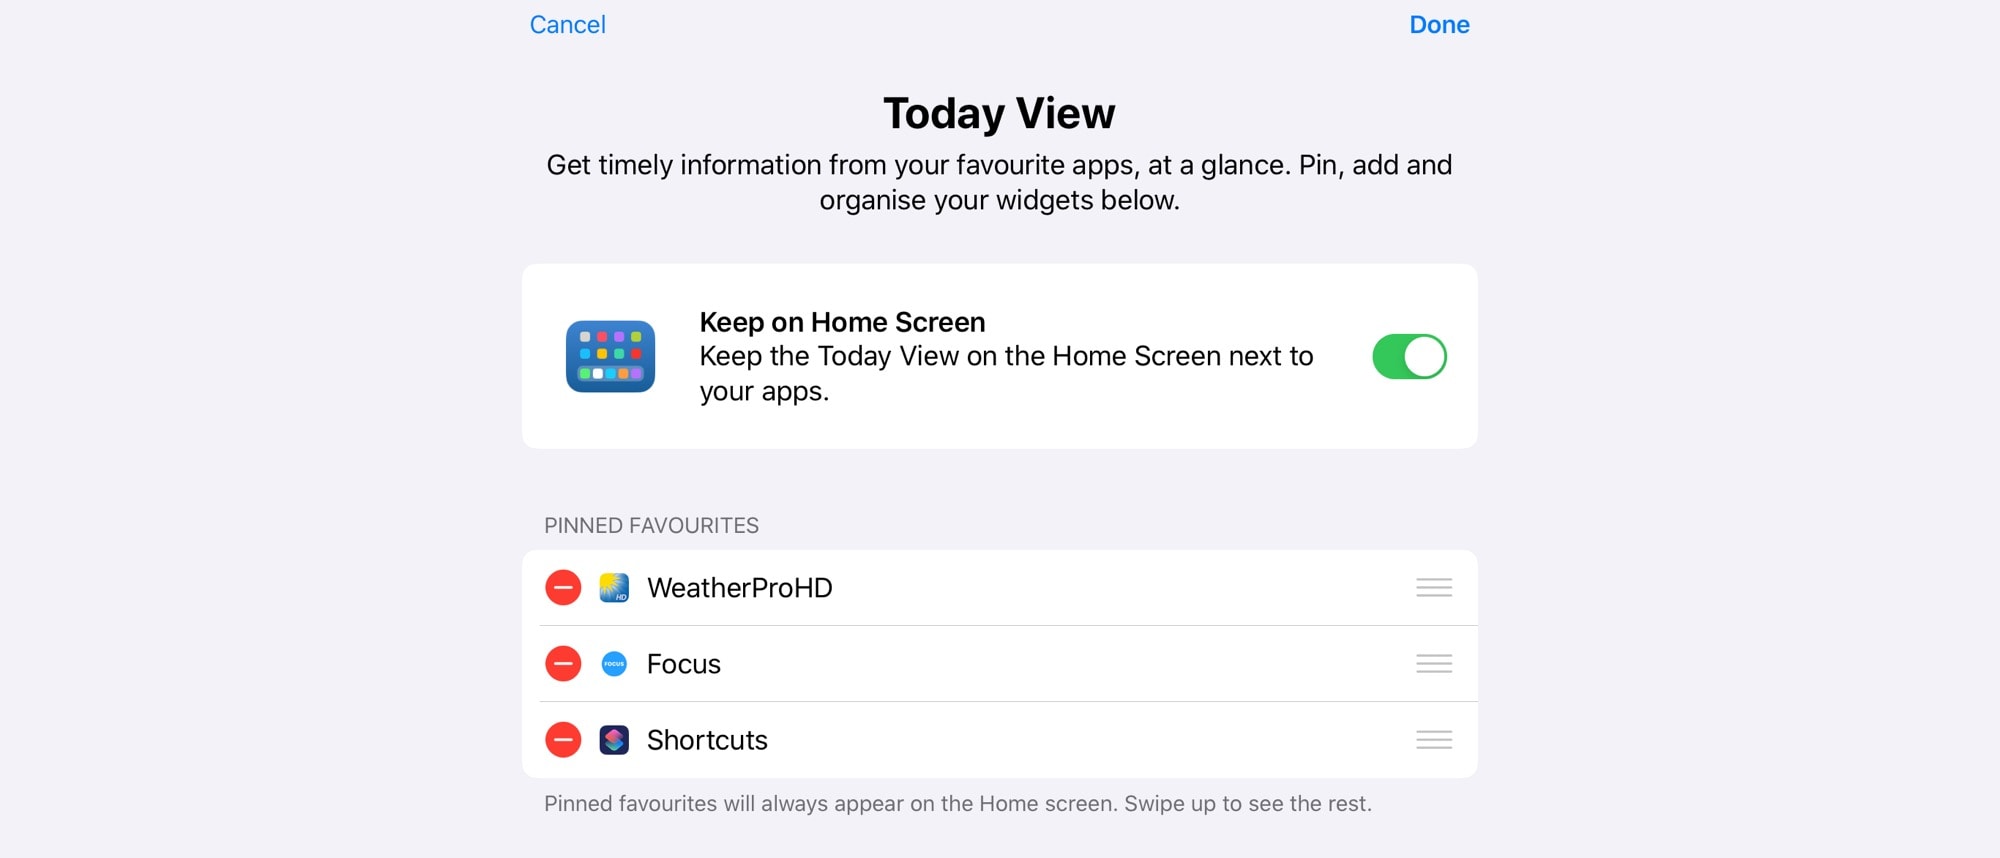 Pin your widgets to your iPad Home screen and add favorites.